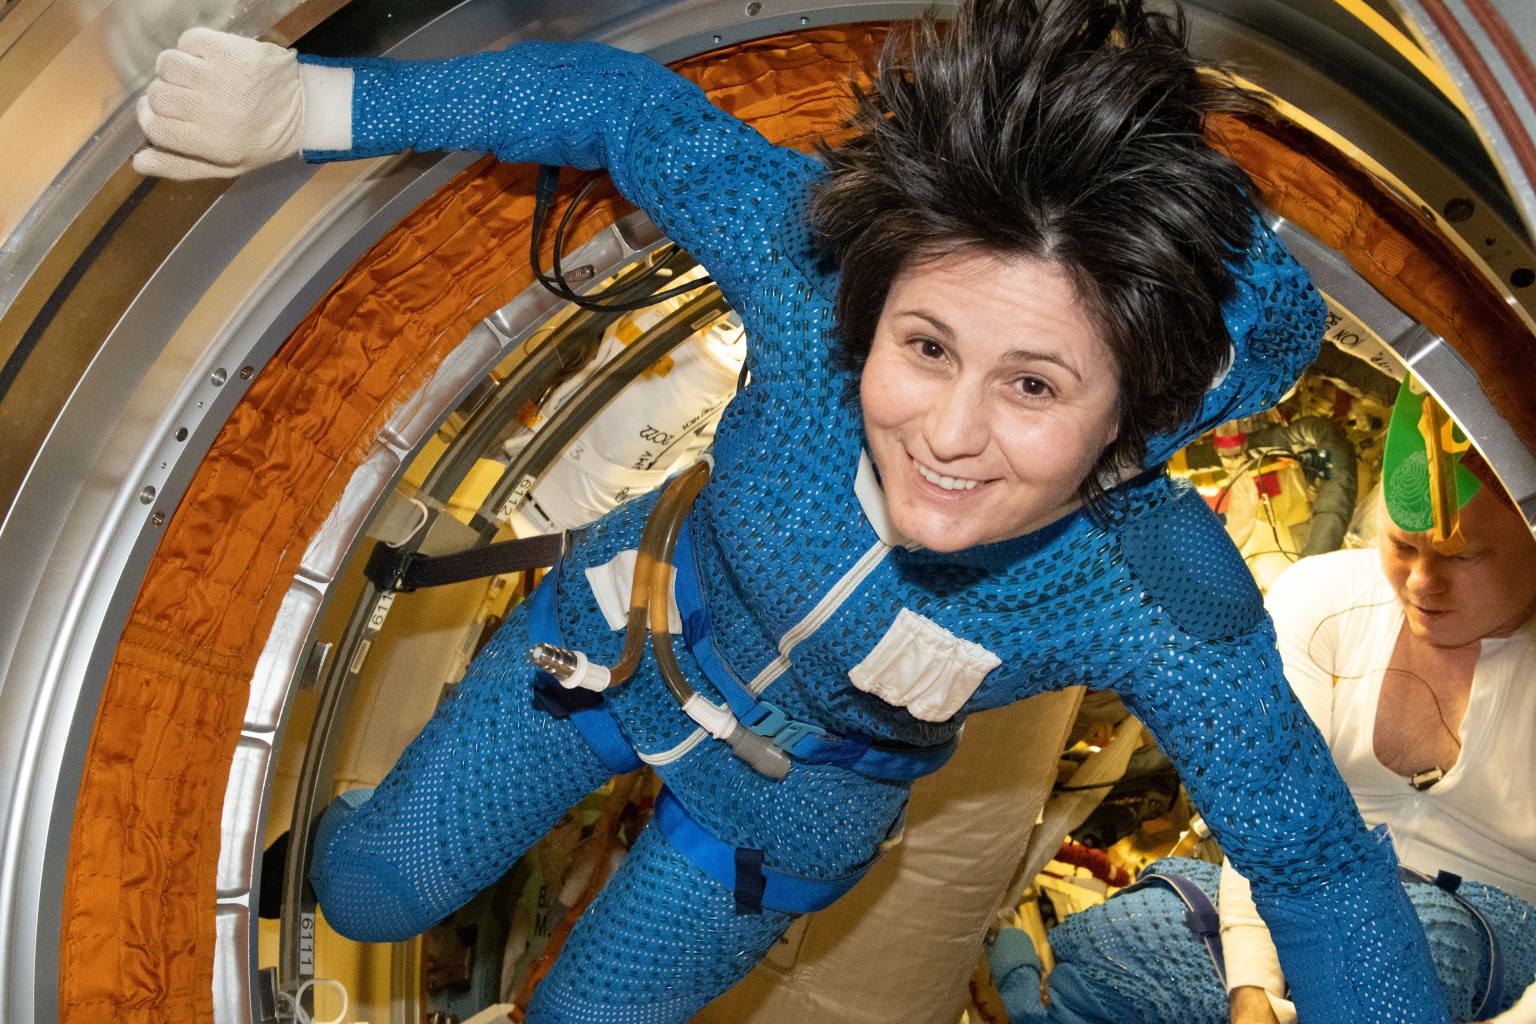 Expedition 67 Flight Engineer Samantha Cristoforetti of ESA (European Space Agency) is pictured inside the International Space Station's Poisk module preparing for a spacewalk. She and Expedition 67 Commander Oleg Artemyev (rear) would exit the Poisk airlock to continue the outfitting of the European robotic arm attached to Nauka during a spacewalk that lasted seven hours and five minutes.